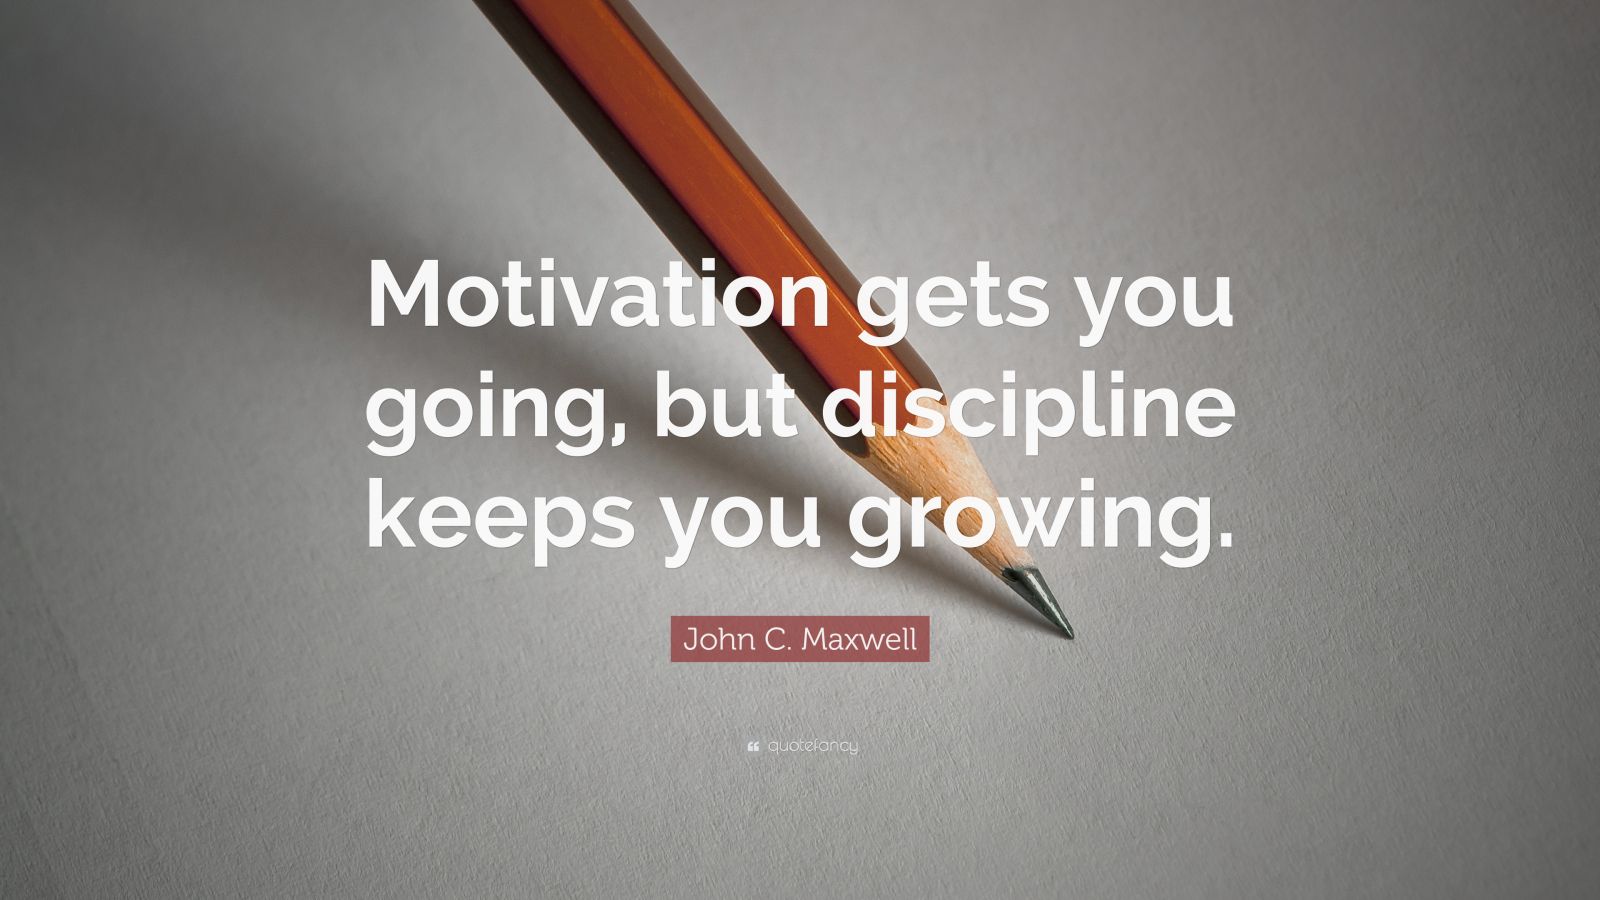 John C. Maxwell Quote: “Motivation gets you going, but discipline keeps